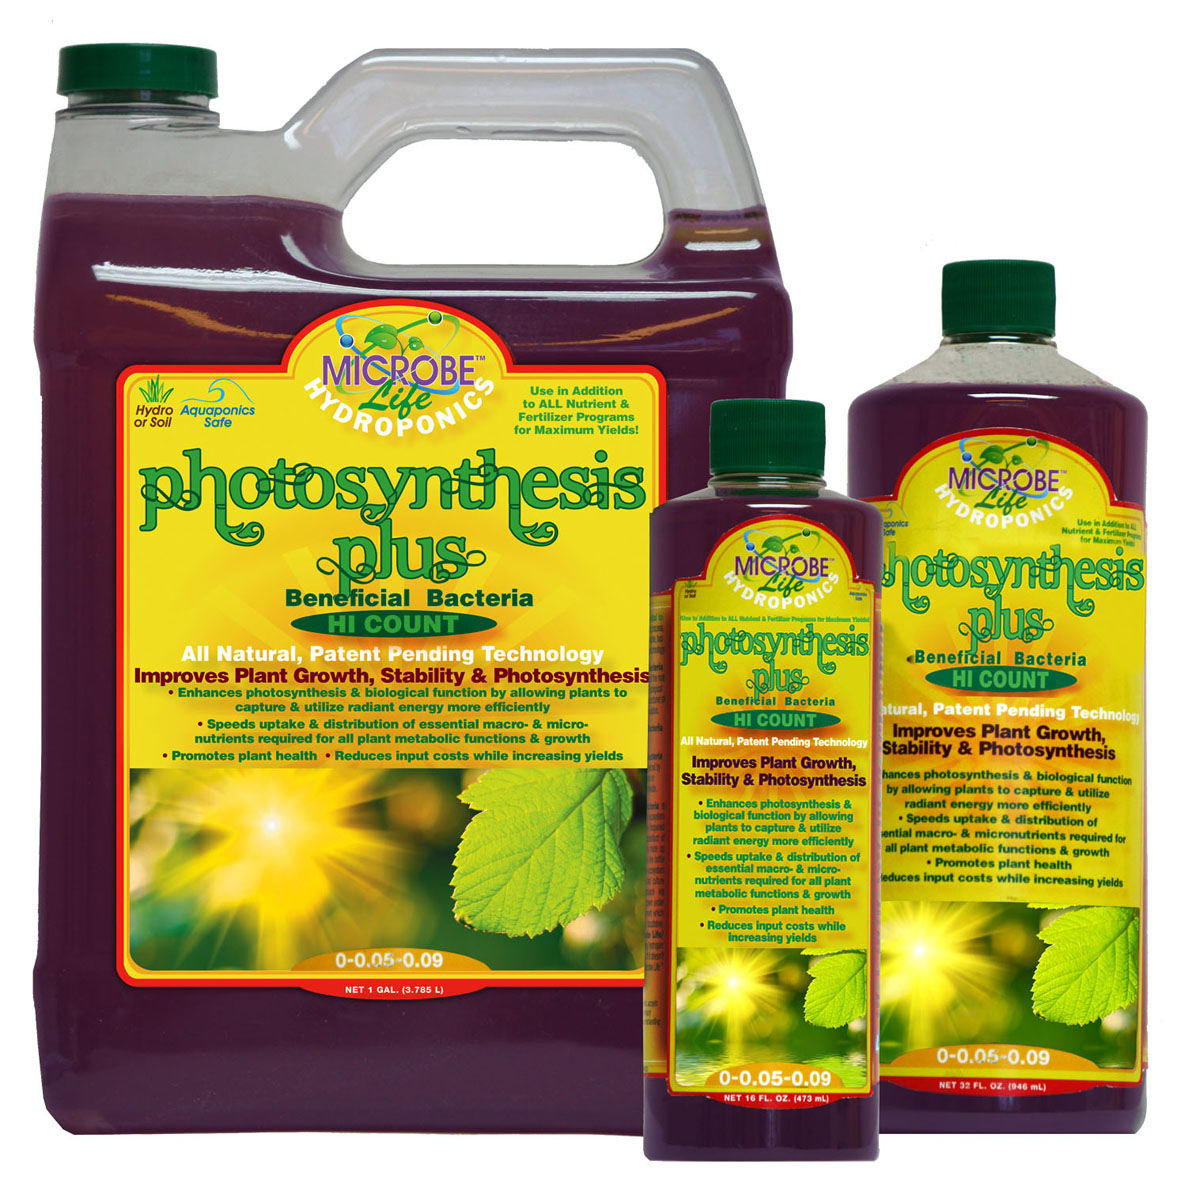 Picture for Microbe Life Photosynthesis Plus, 1 gal